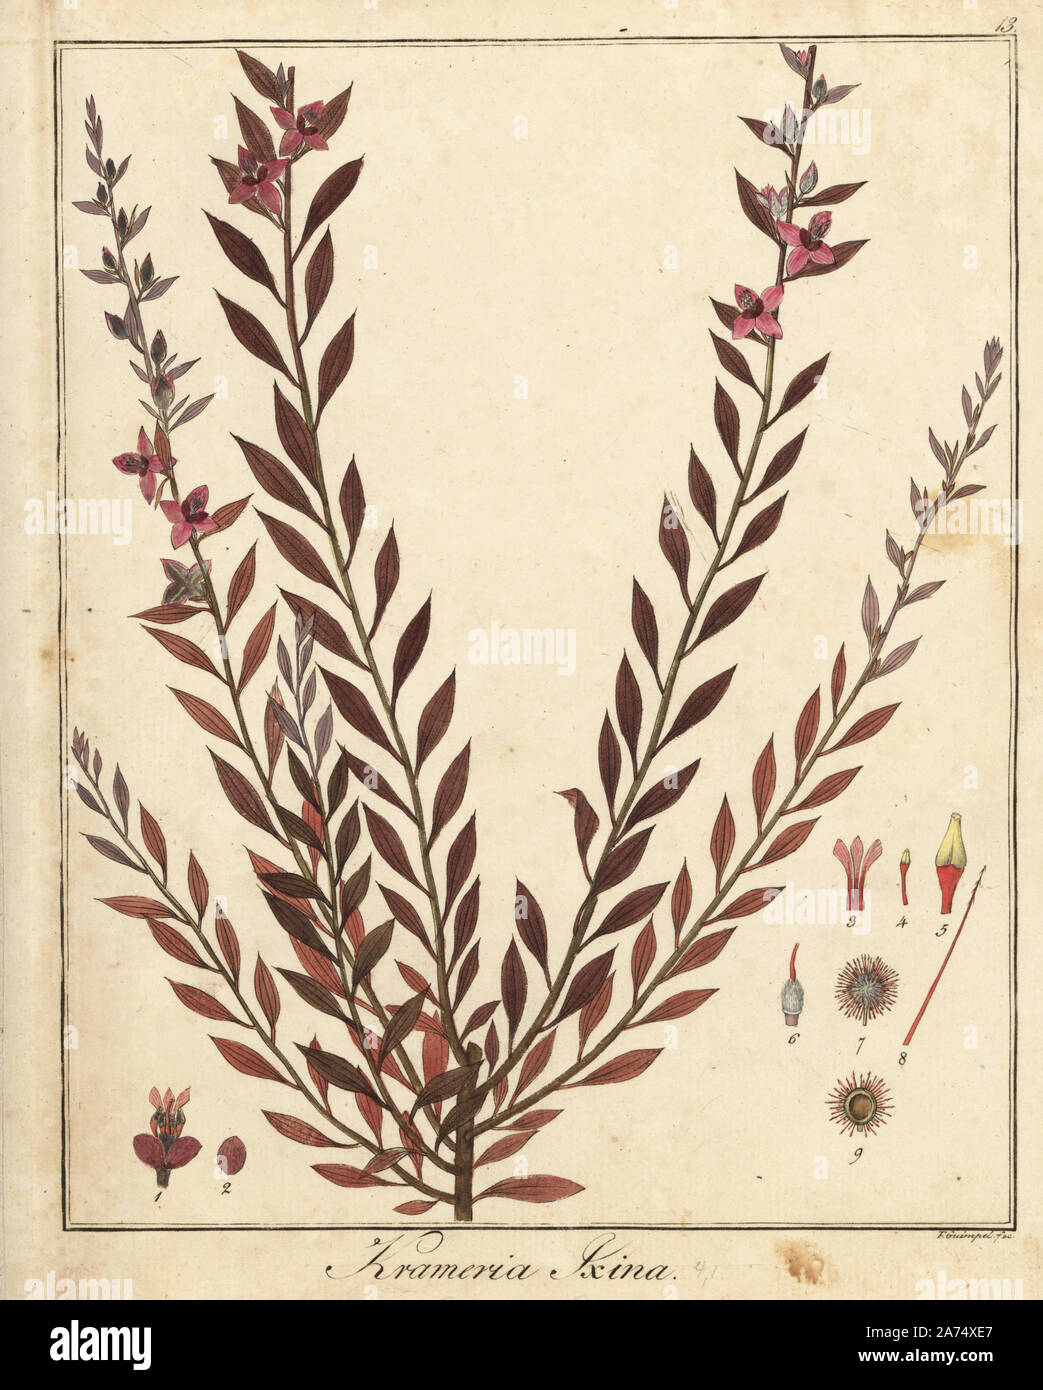 Abrojo colorado, Krameria ixine. Handcoloured copperplate engraving by F. Guimpel from Dr. Friedrich Gottlob Hayne's Medical Botany, Berlin, 1822. Hayne (1763-1832) was a German botanist, apothecary and professor of pharmaceutical botany at Berlin University. Stock Photo